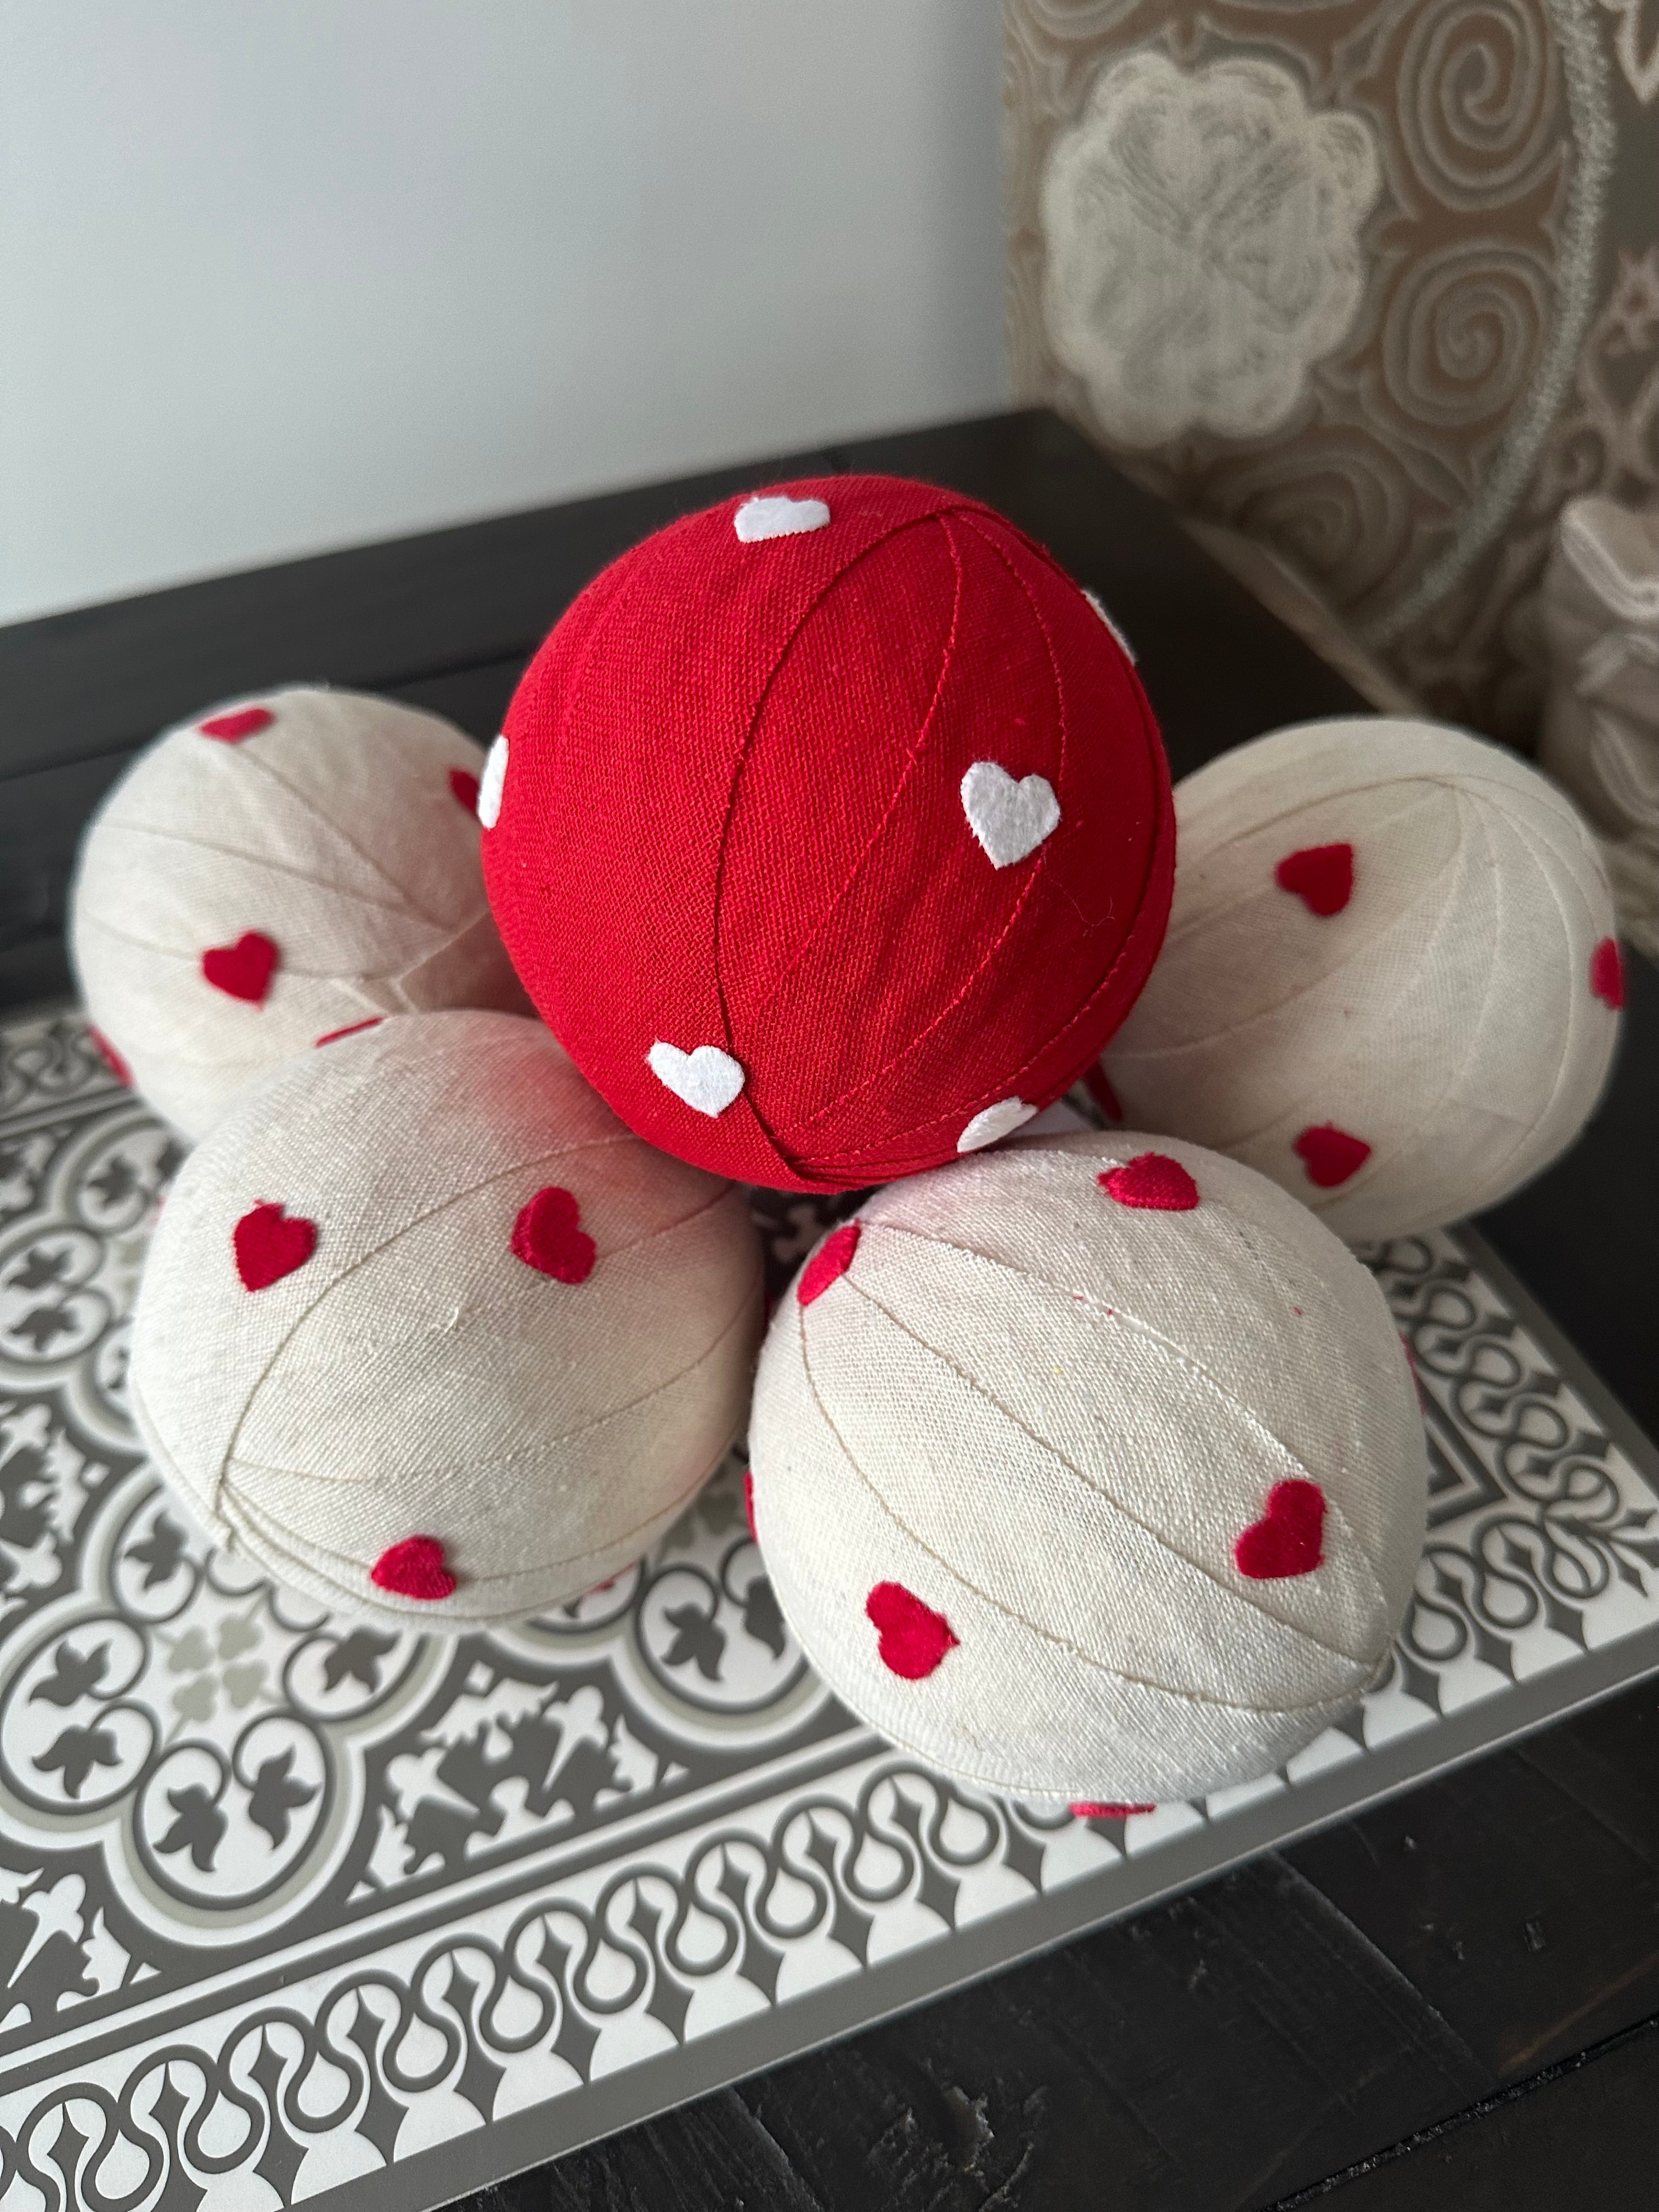 Decorative Fabric Ball with Hearts